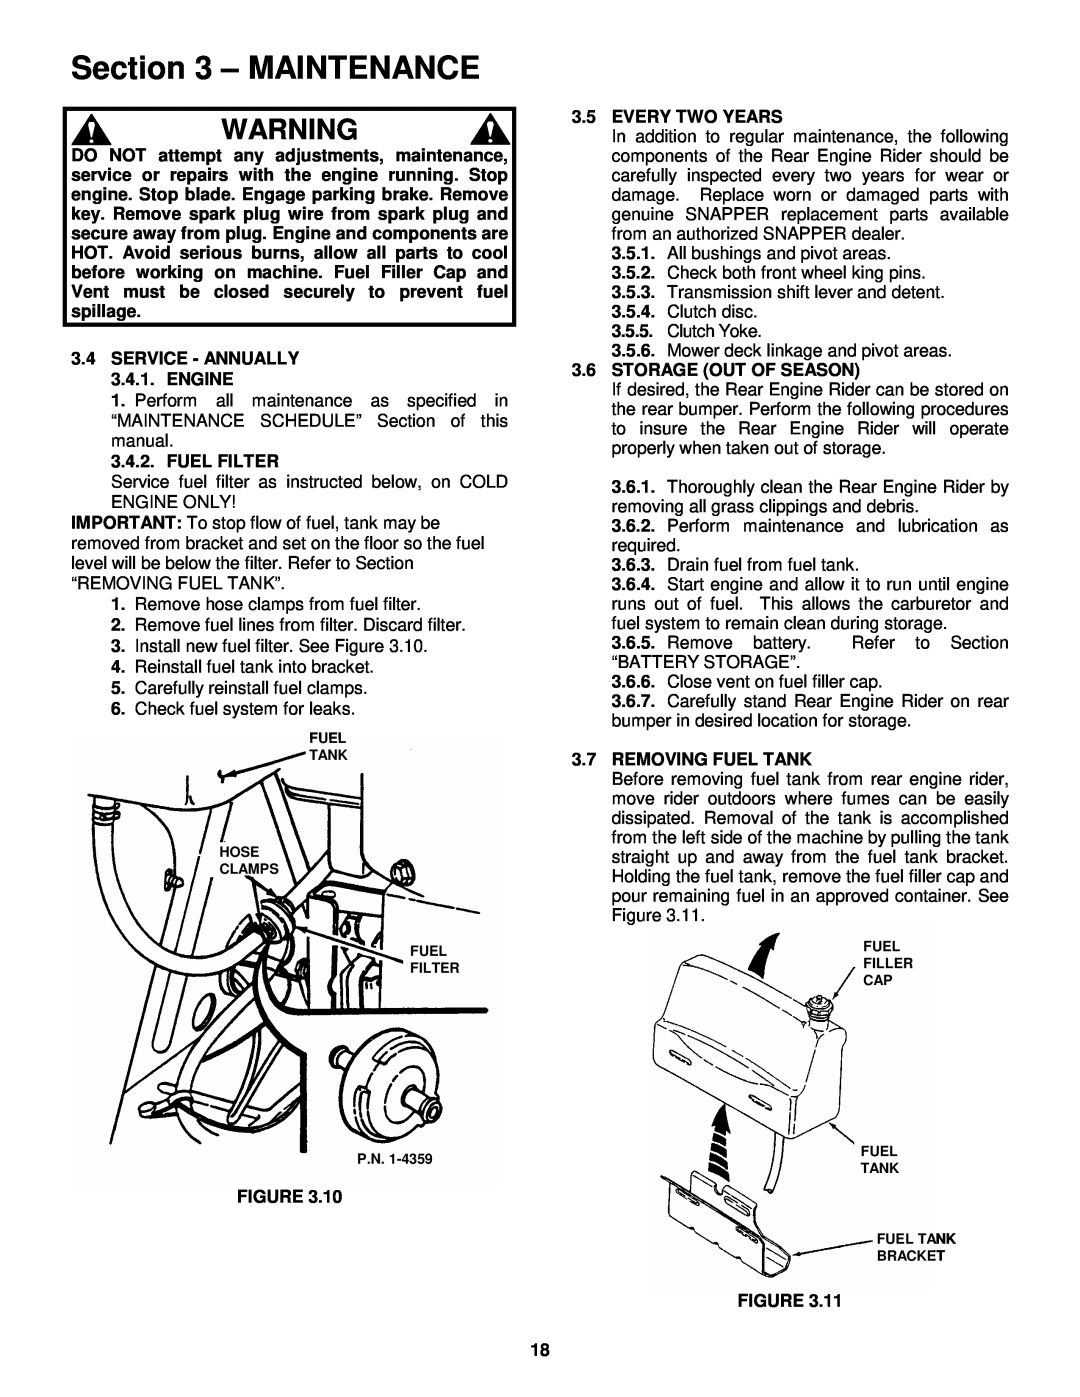 Snapper important safety instructions Maintenance, Service fuel filter as instructed below, on COLD ENGINE ONLY 